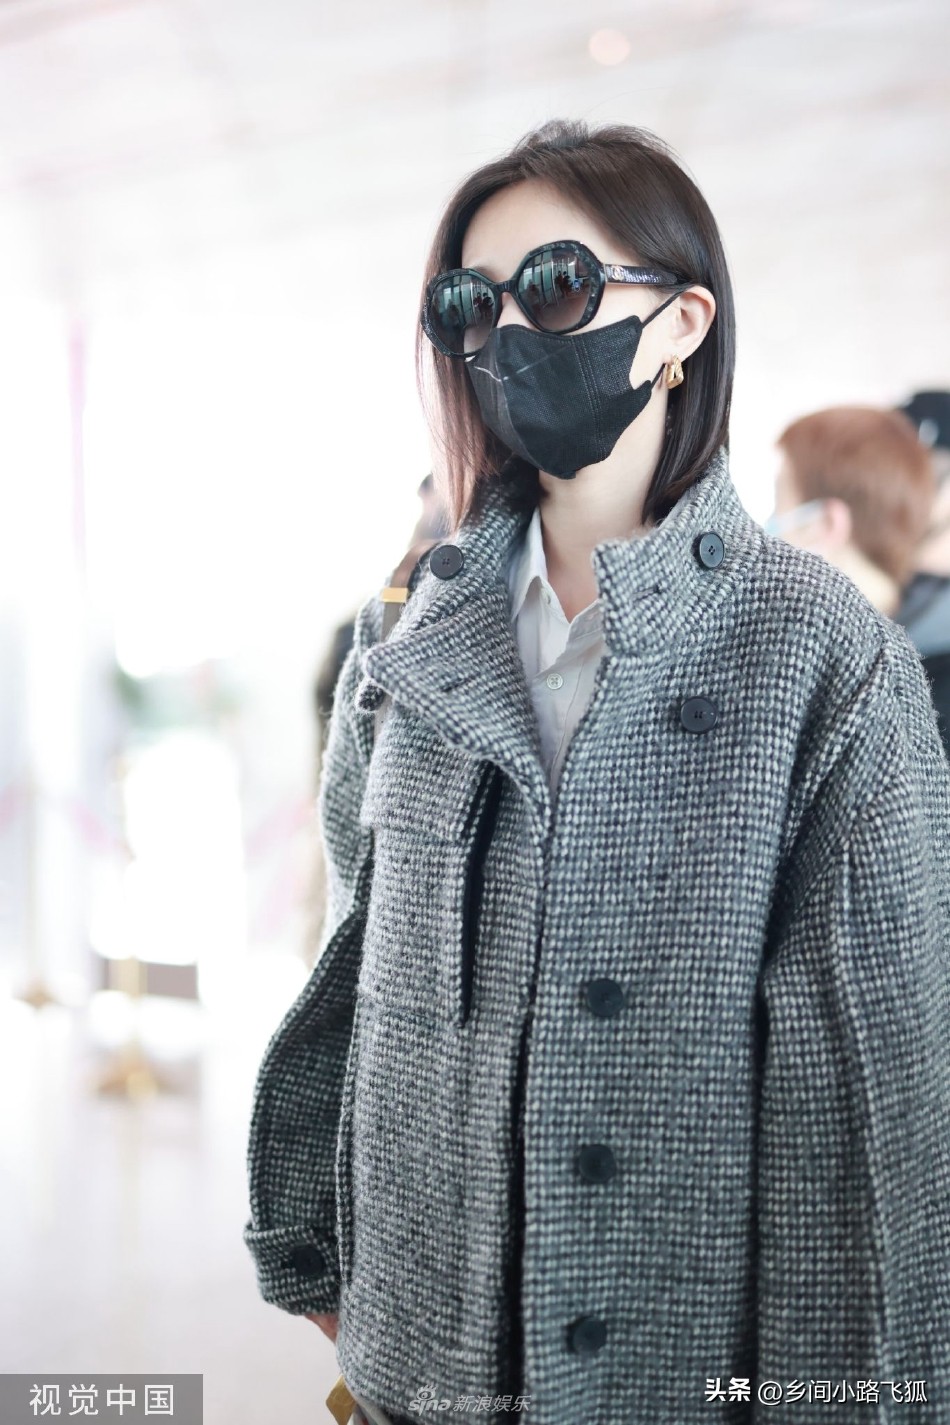 Li Yitong appeared in the airport wearing a small fragrance jacket